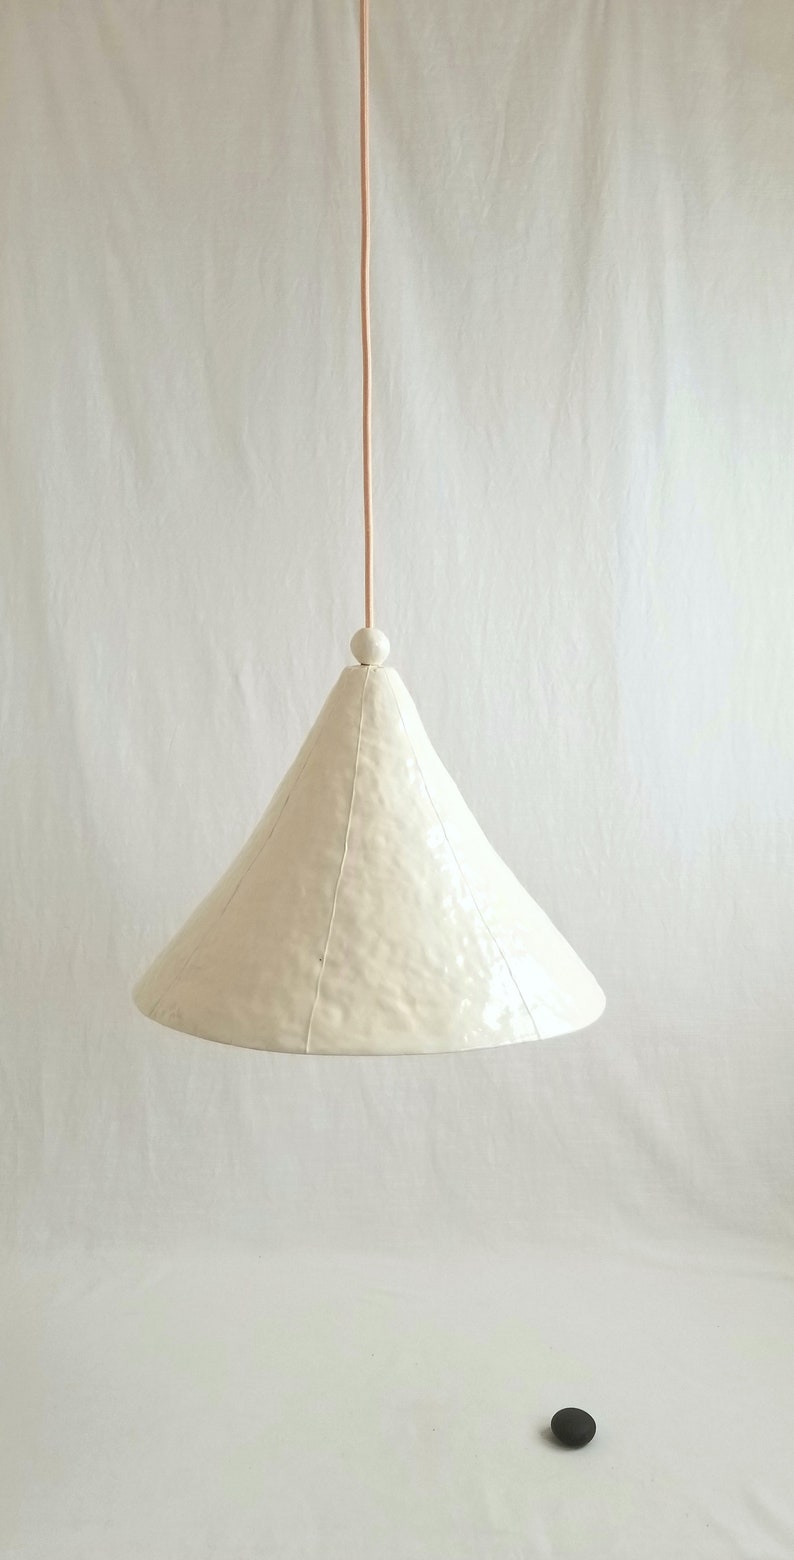 Large, 15" diameter, white cone pendant light with bead detail. Handmade in clay